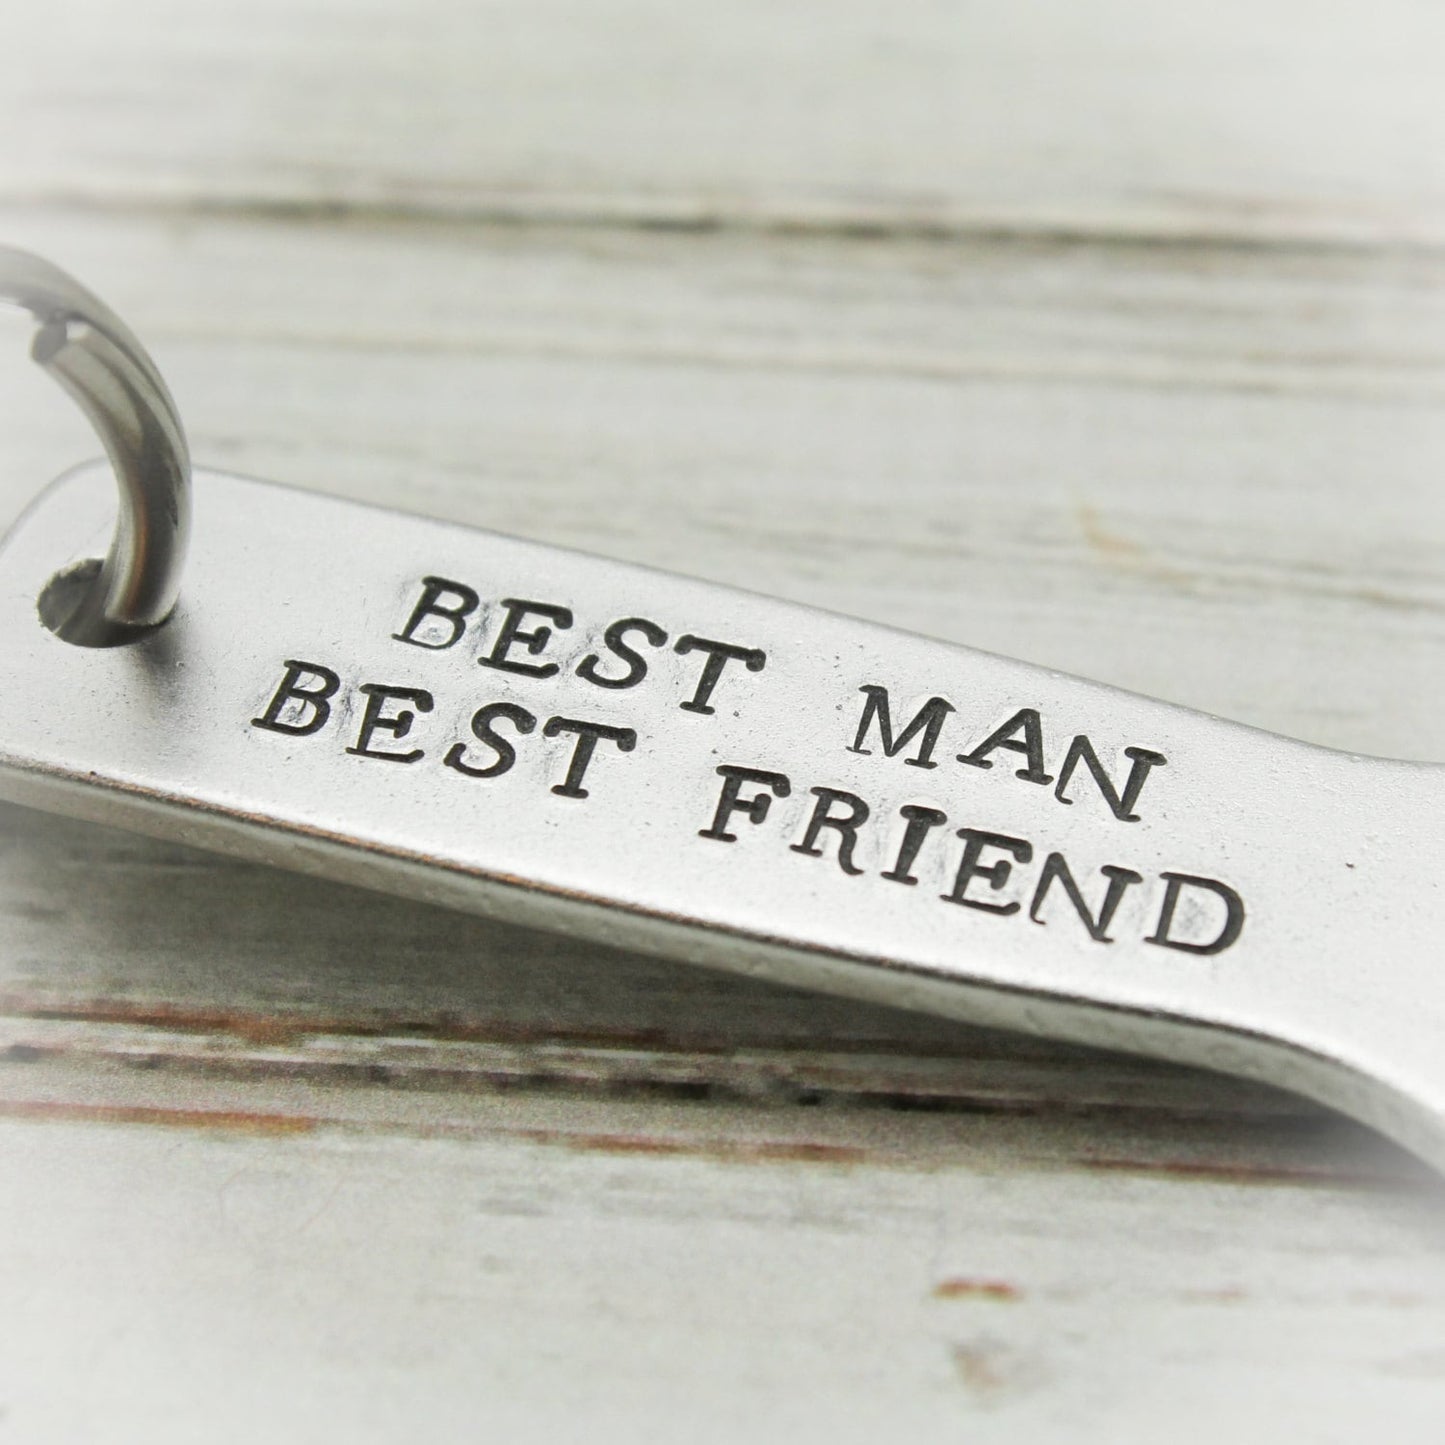 BEST MAN, Groomsmen Aluminum Key Chain Bottle Cap Opener Hand Stamped Personalized Hand Stamped Personalized Key Chain